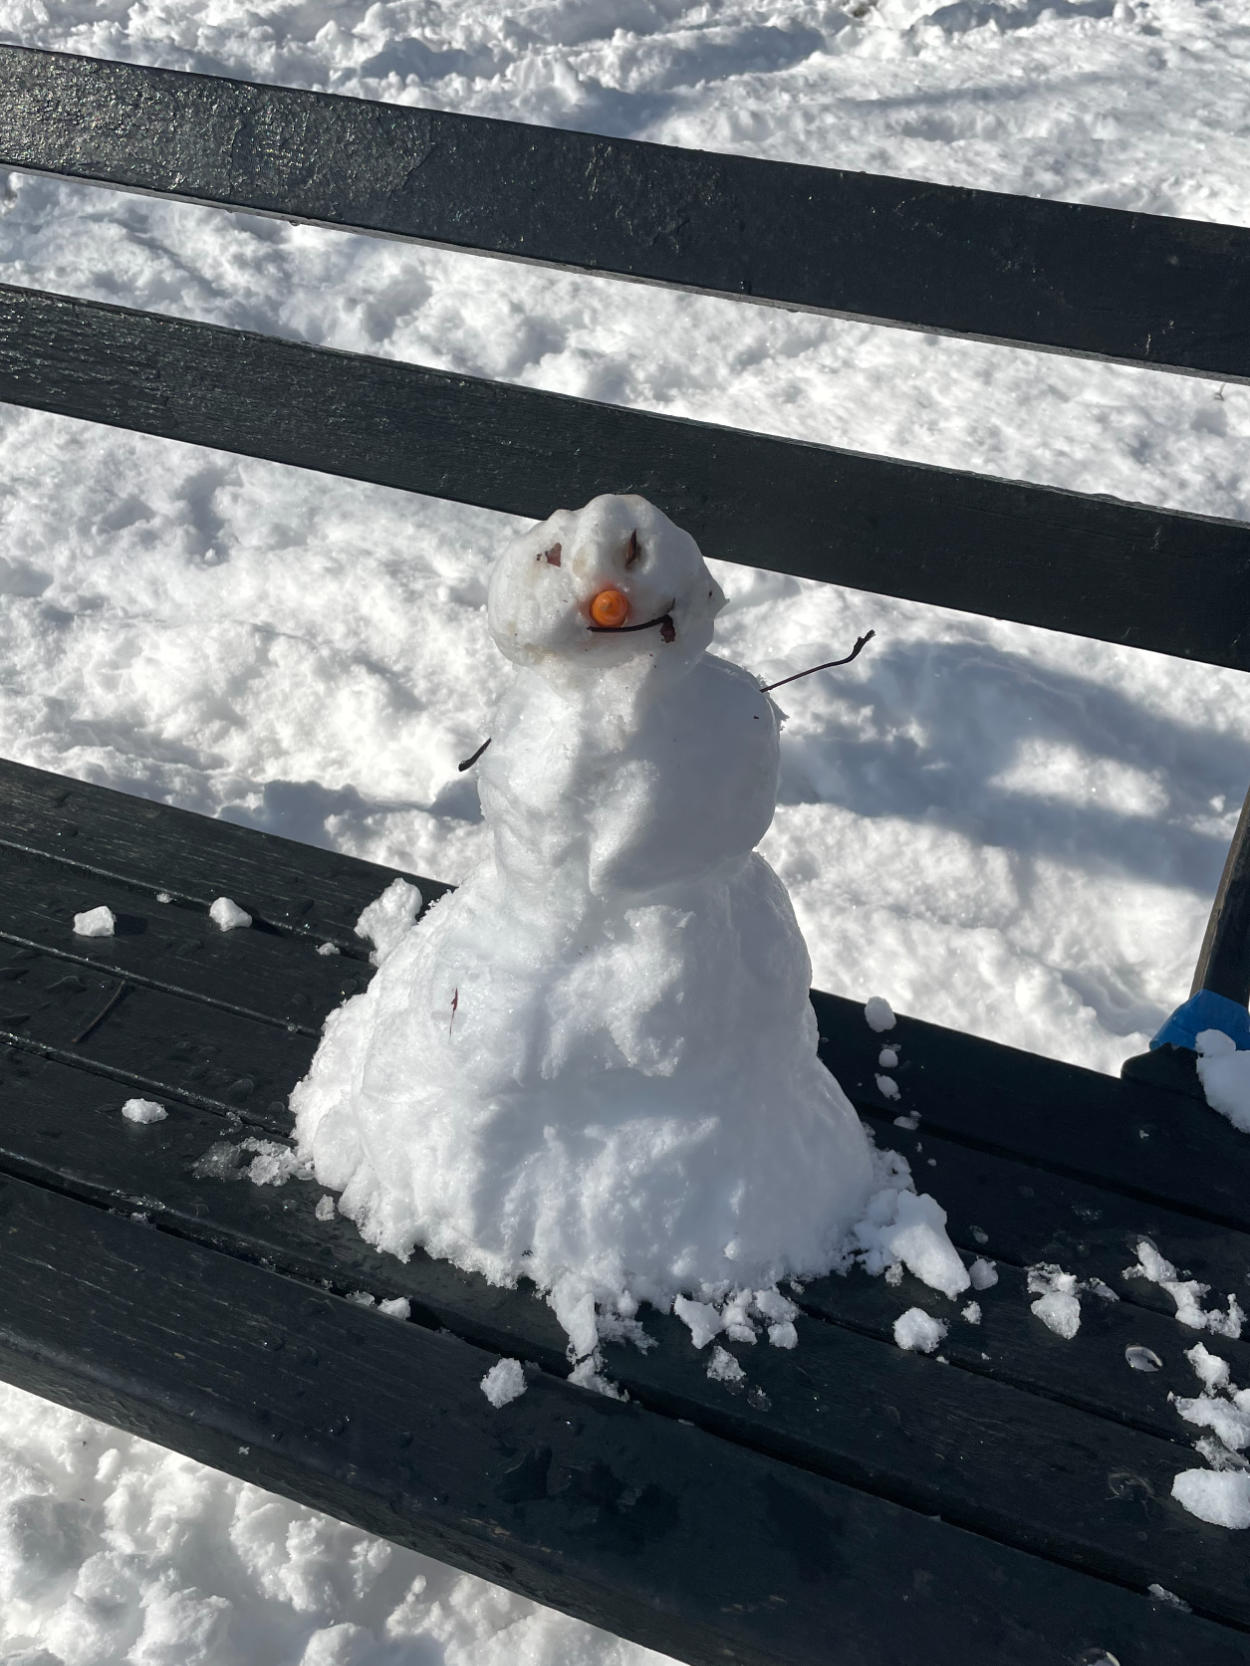 A small snowman sitting on a black bench